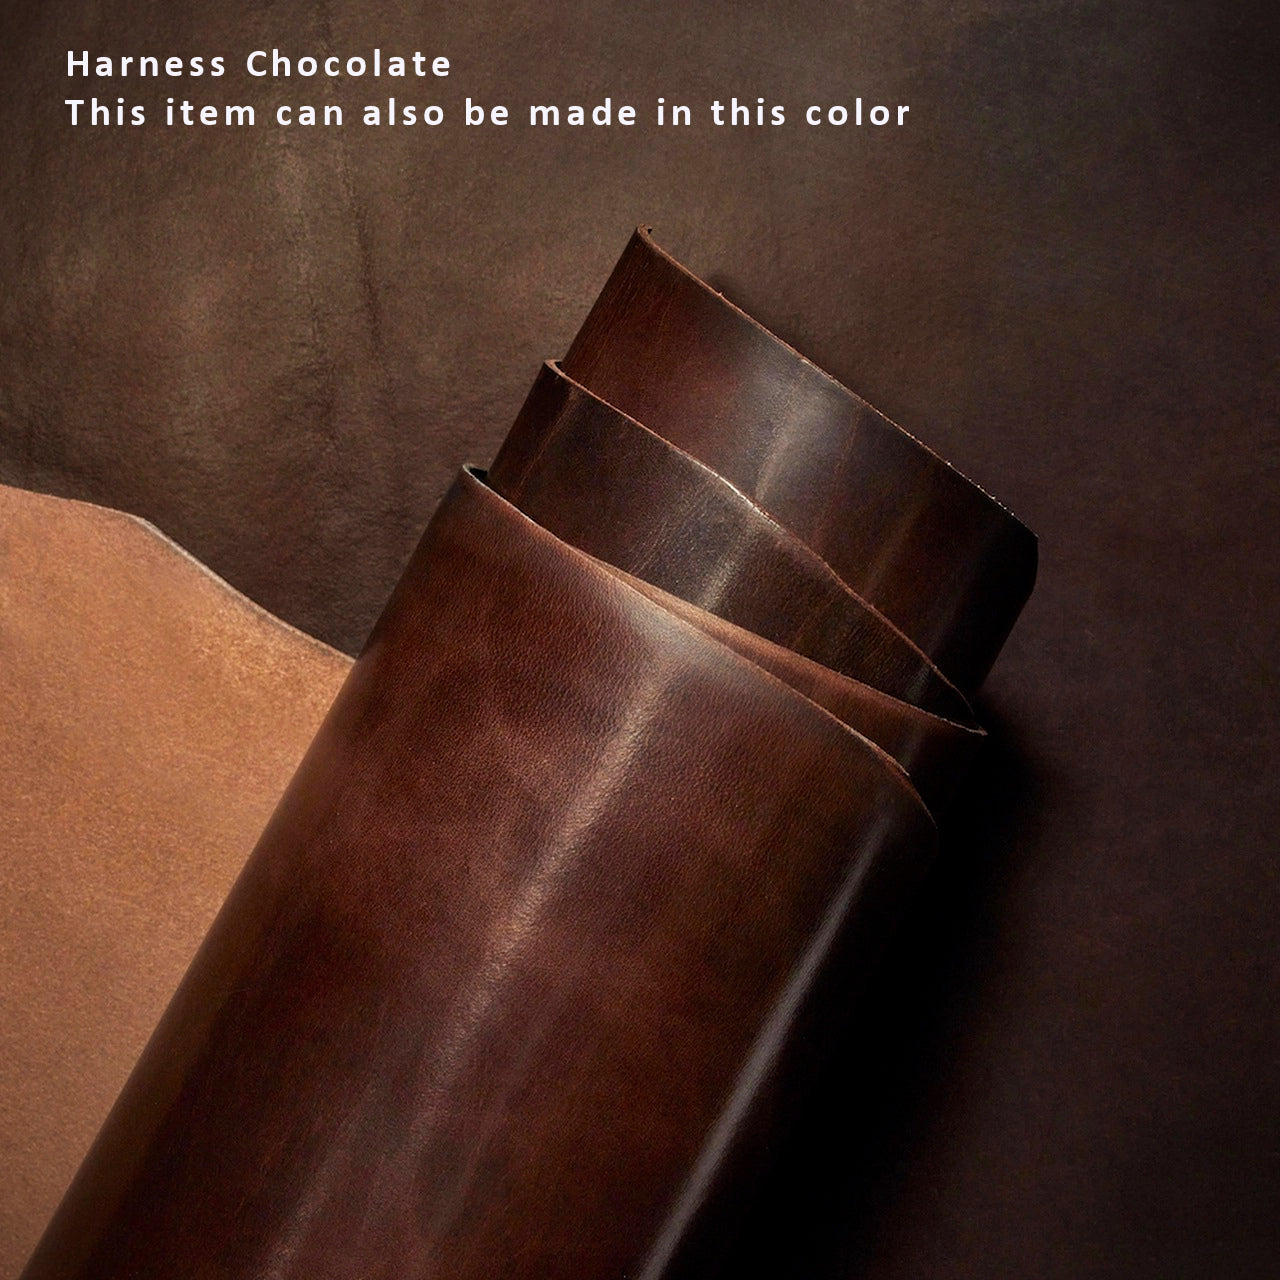 #color+harness chocolate